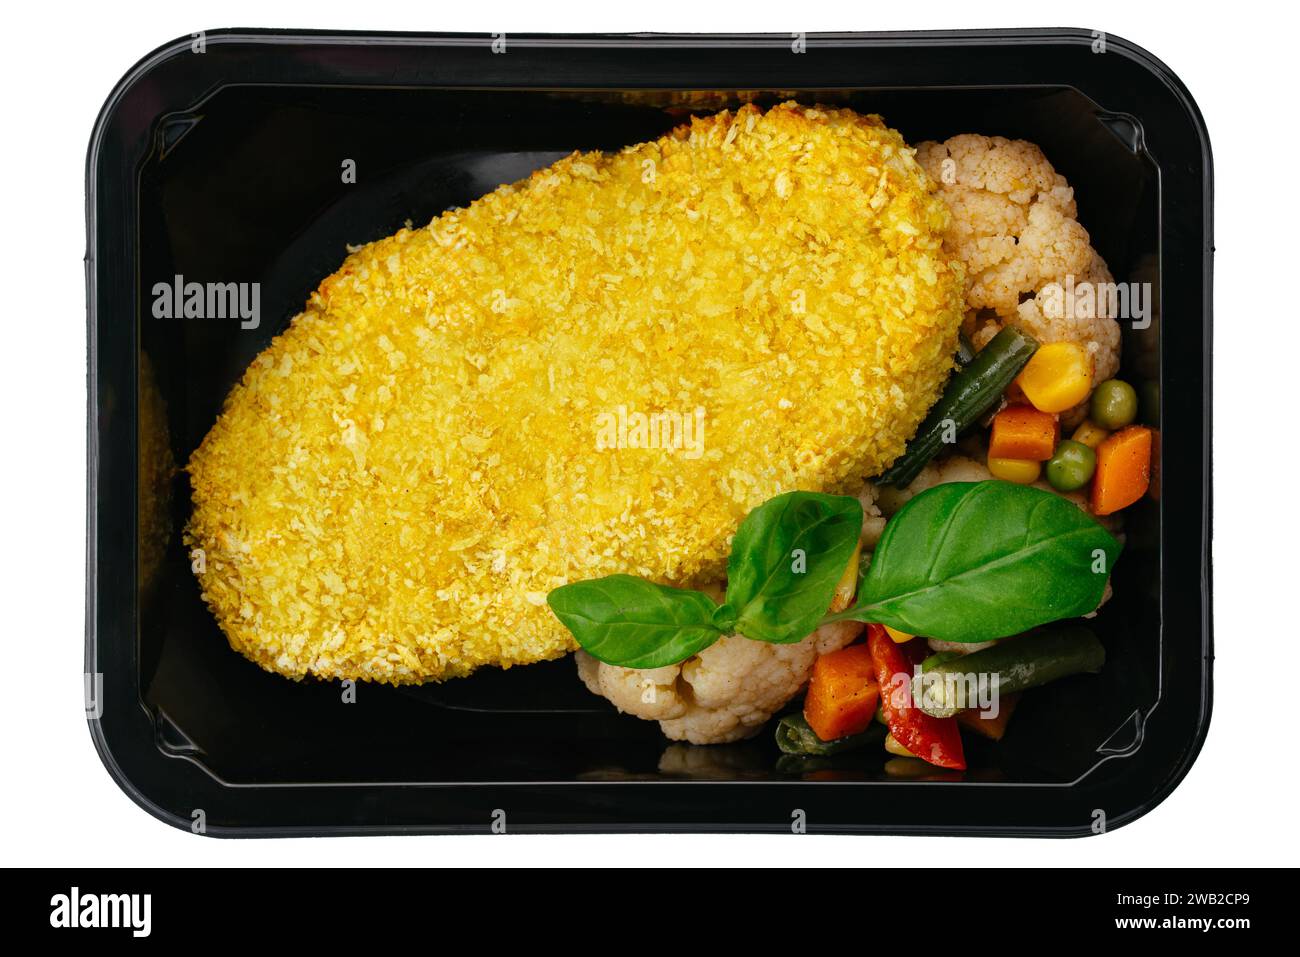 chicken schnitzel with side dish in a lunch box on a white background Stock Photo